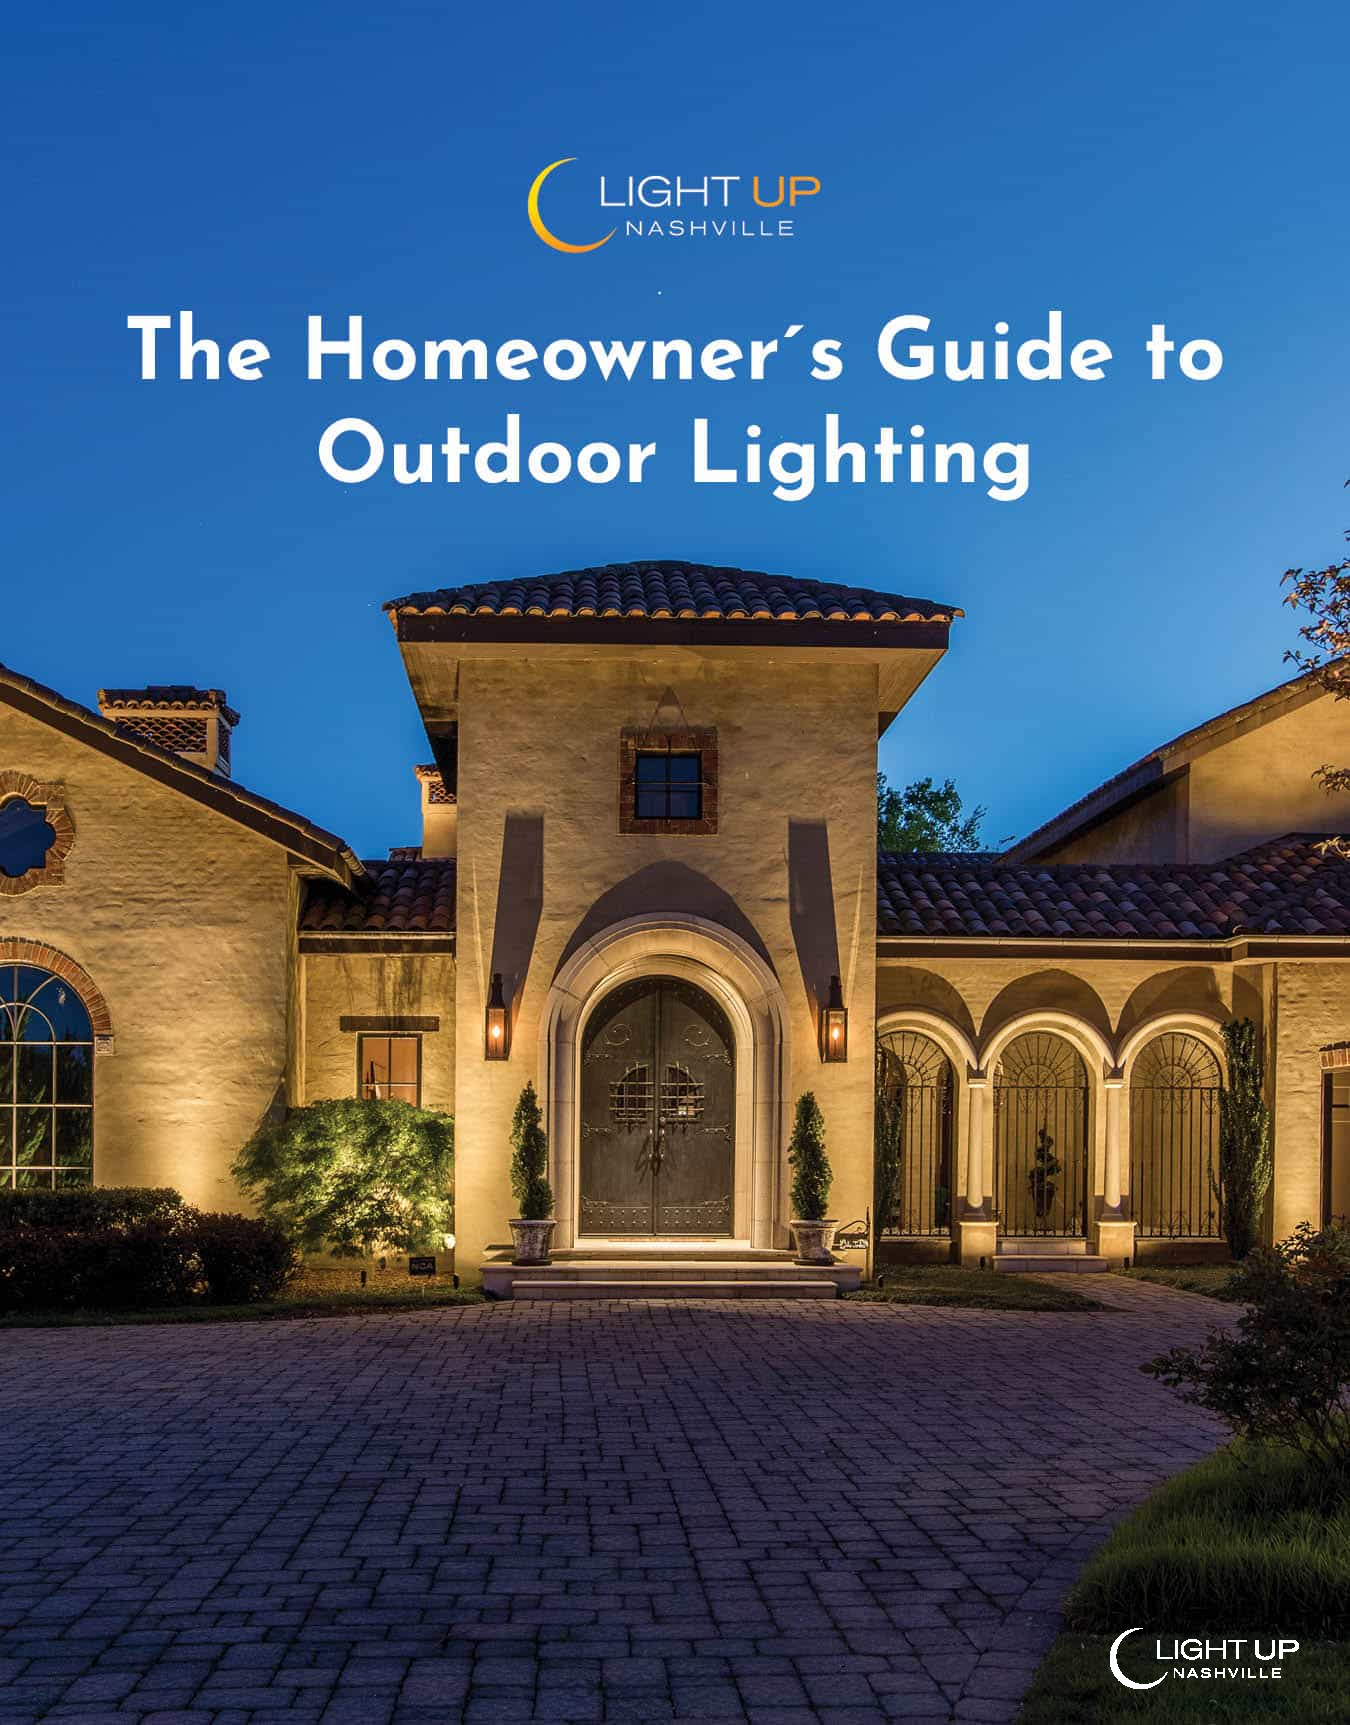 Download The Homeowner's Guide to Outdoor Lighting